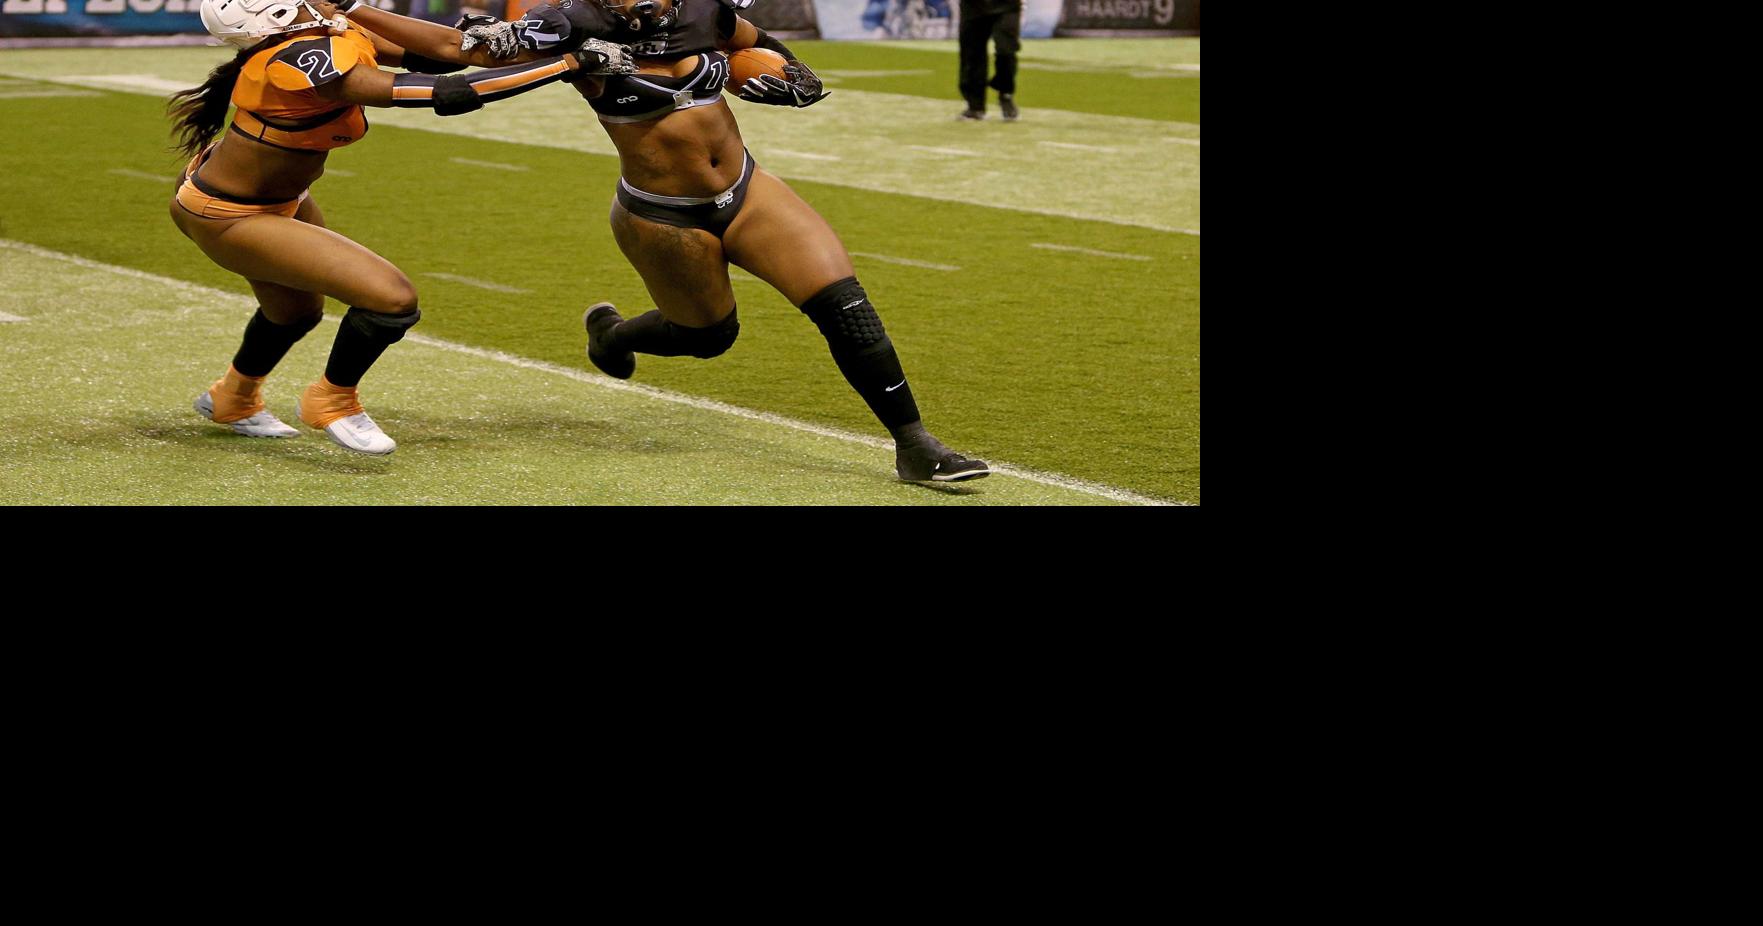 File Under WTF: The Lingerie Football League Wants To Start A